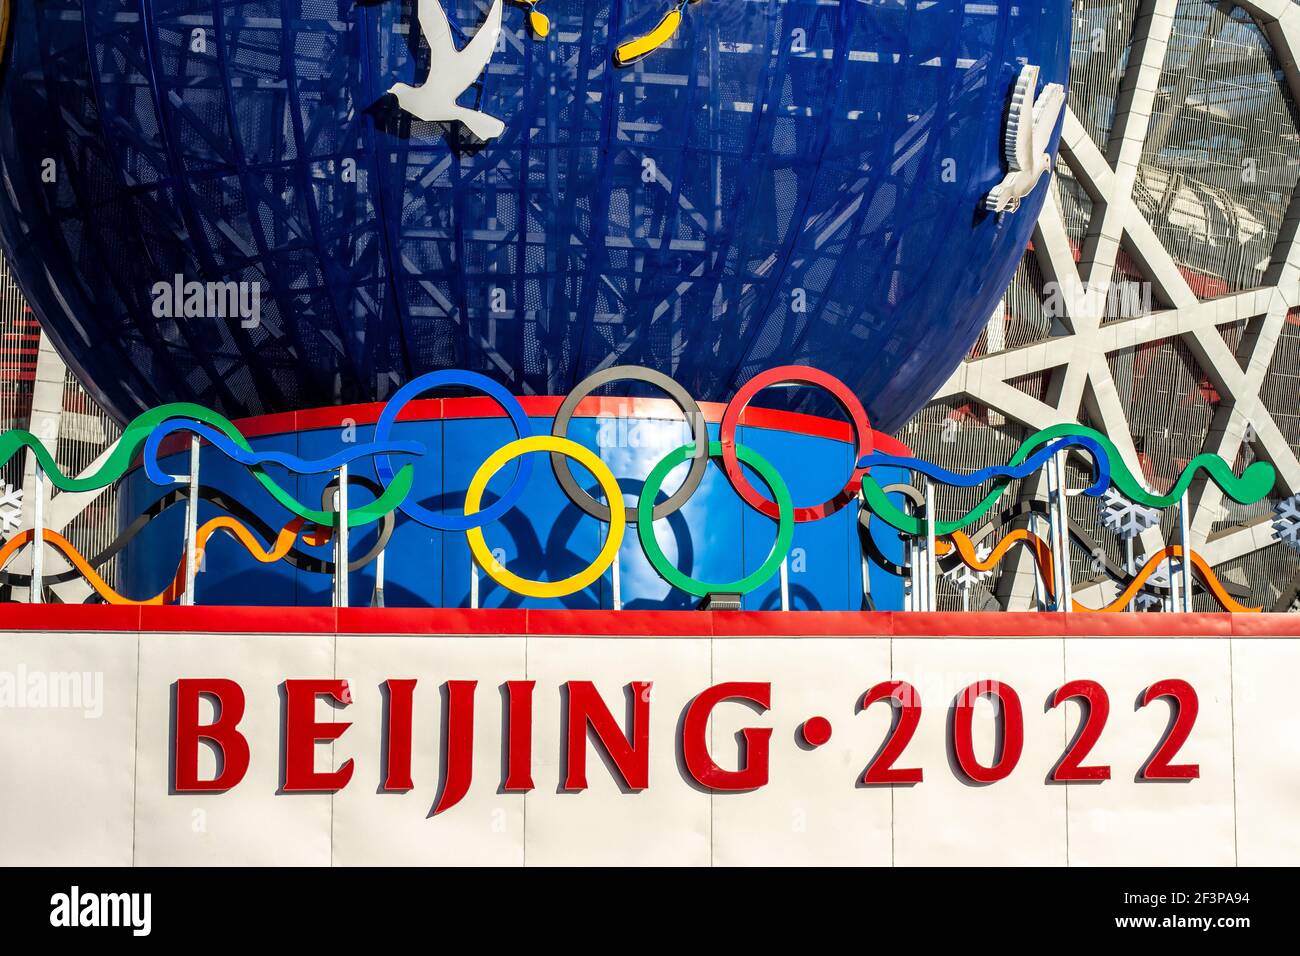 Beijing, China - February 20, 2016: Decorative stand promoting the Beijing Winter Olympic 2022 in front of the Beijing National Stadium Bird's Nest in Stock Photo